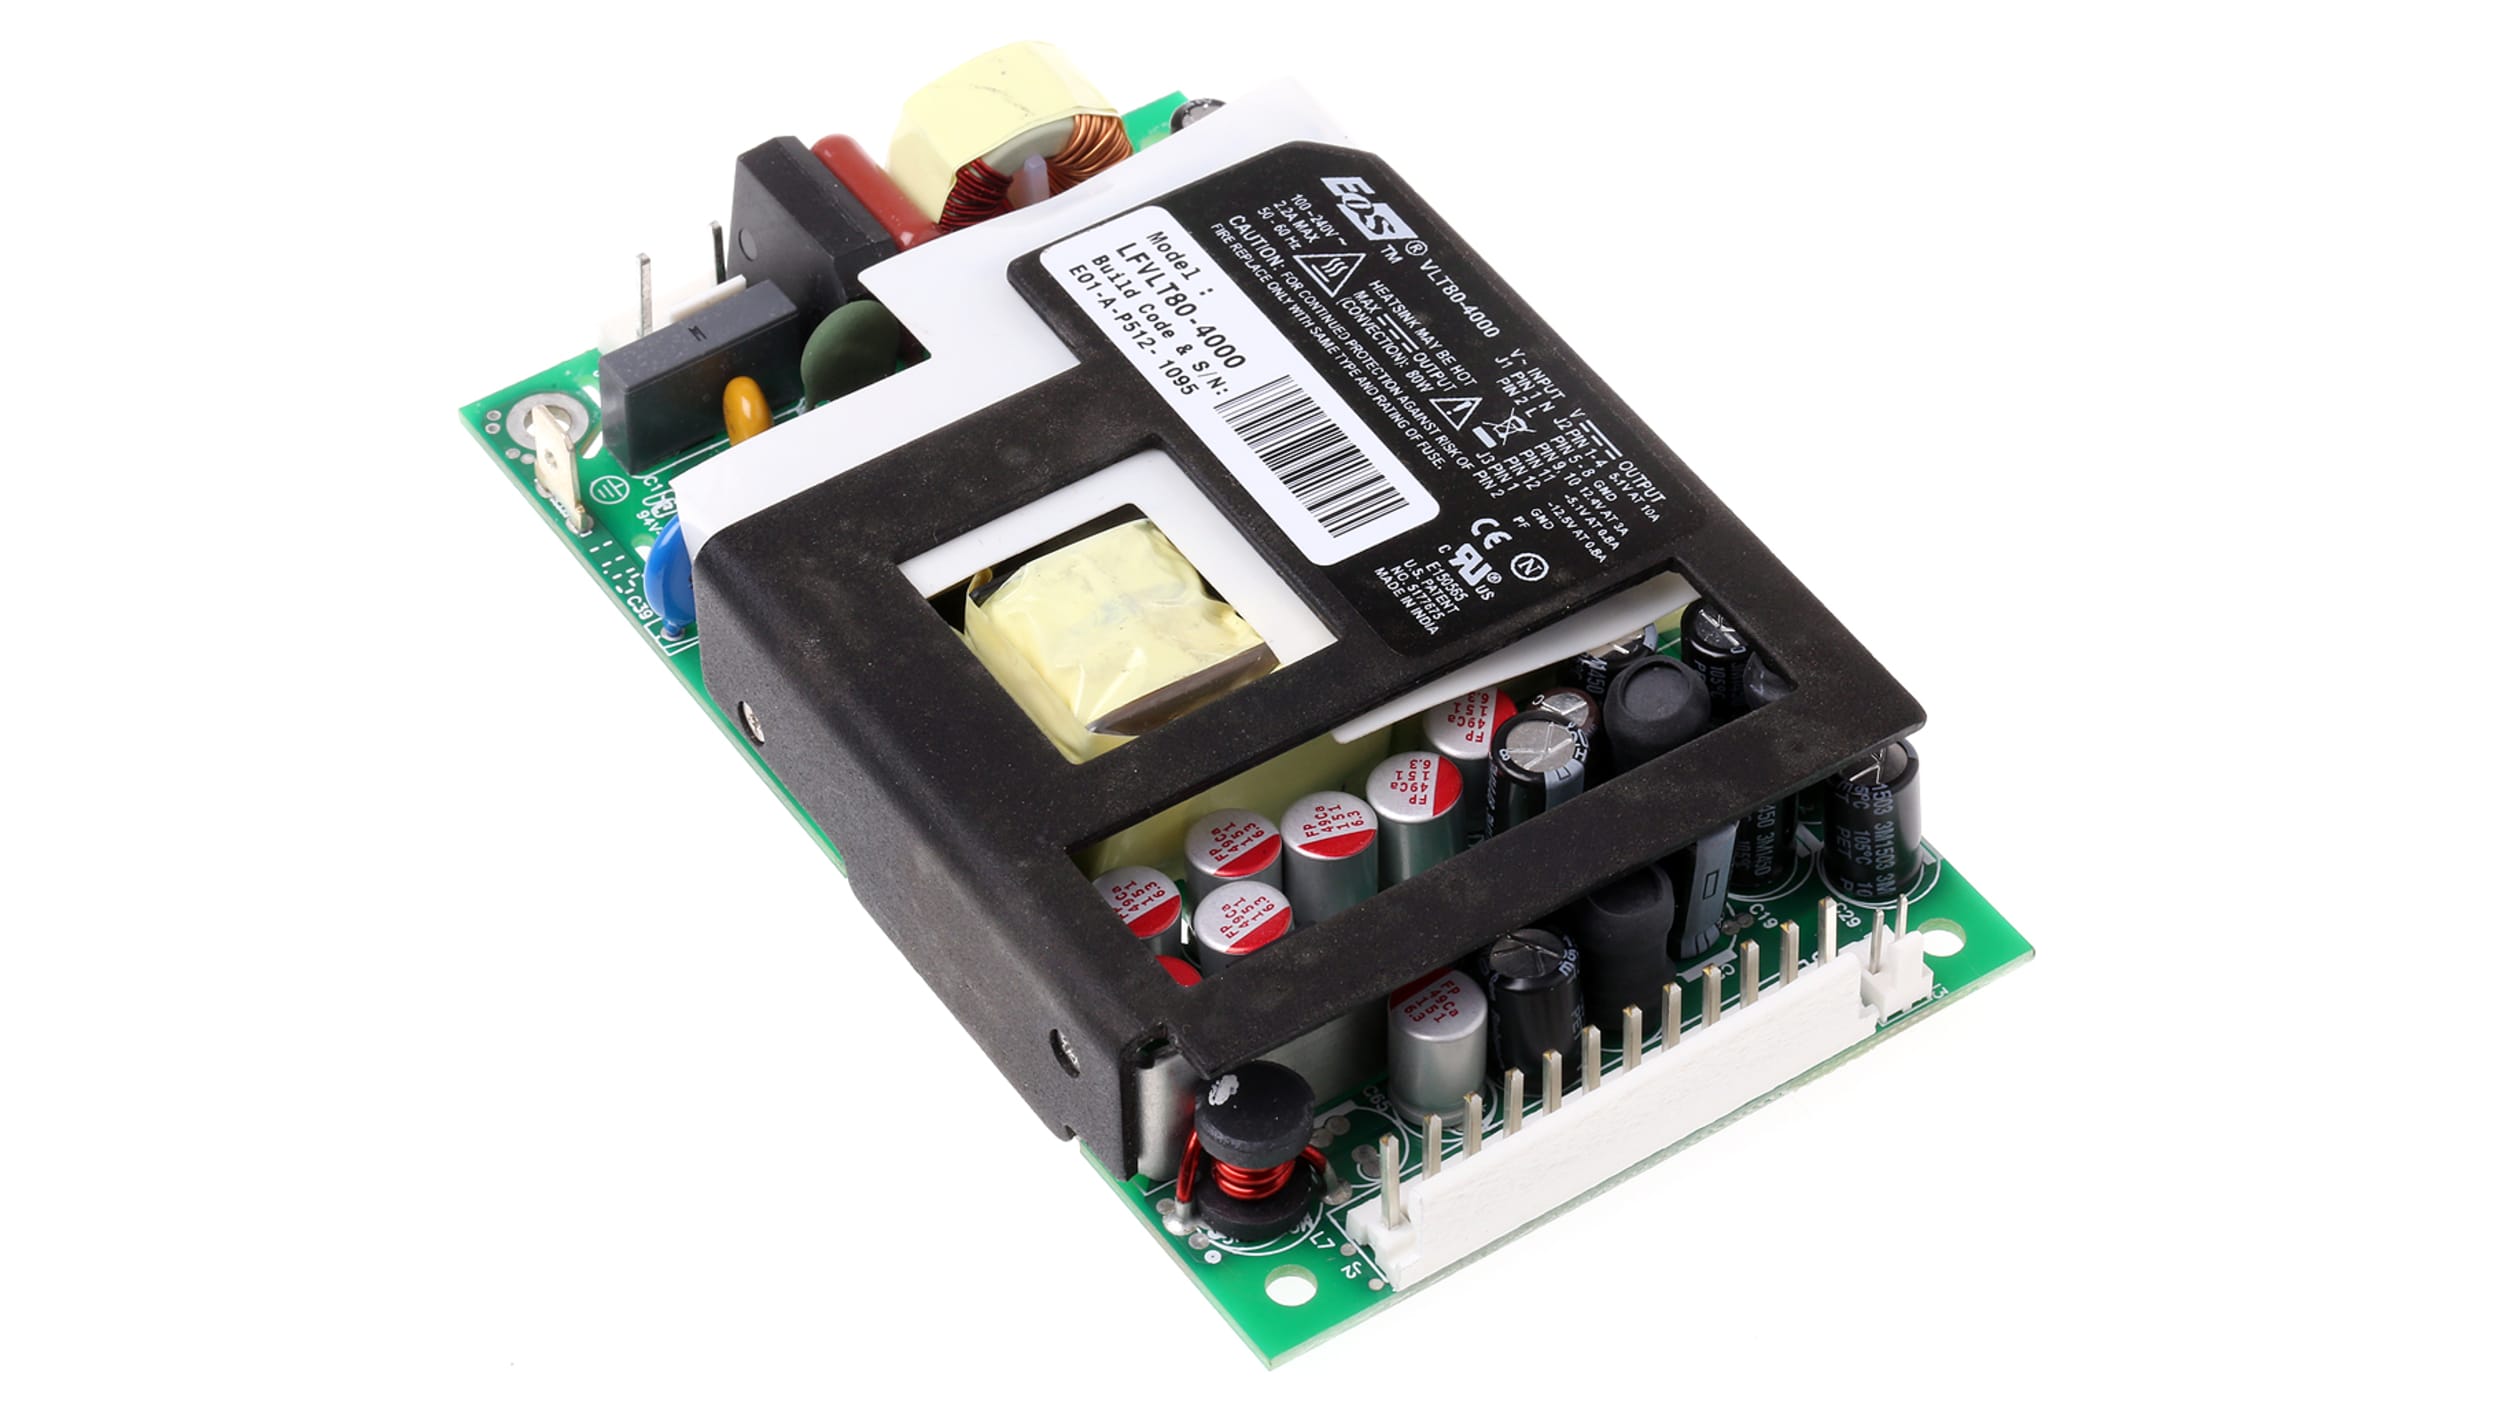 EOS POWER LFMVLT80-1001S1 EOS 80W, Output, Embedded Switch ModePower  Supply (SMPS), 12V, 0.2 to 6.8A